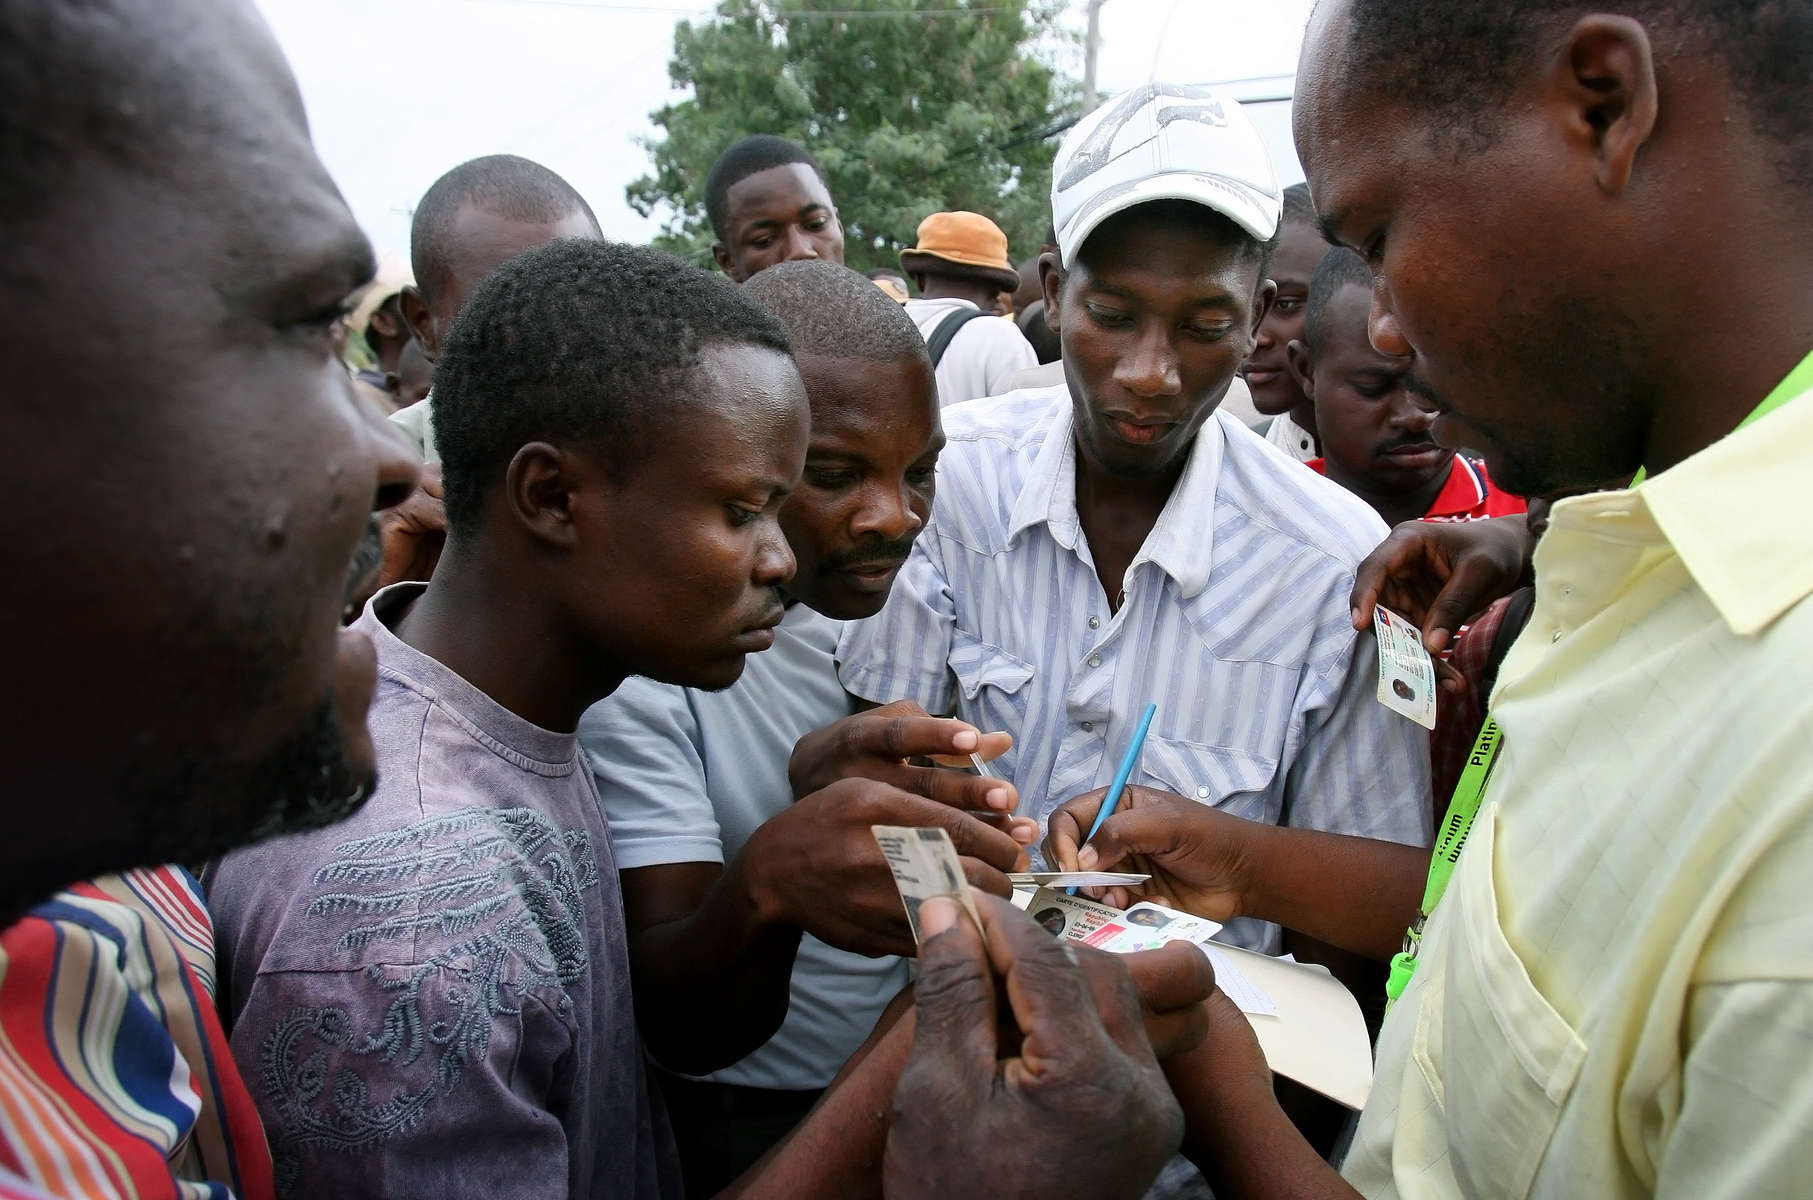 Haitian men gather around a man distributing identification cards needed to get work assisting in the humanitarian aid effort at Port-Au-Prince International Airport in Haiti. (The Press-Enterprise/ Mark Zaleski)